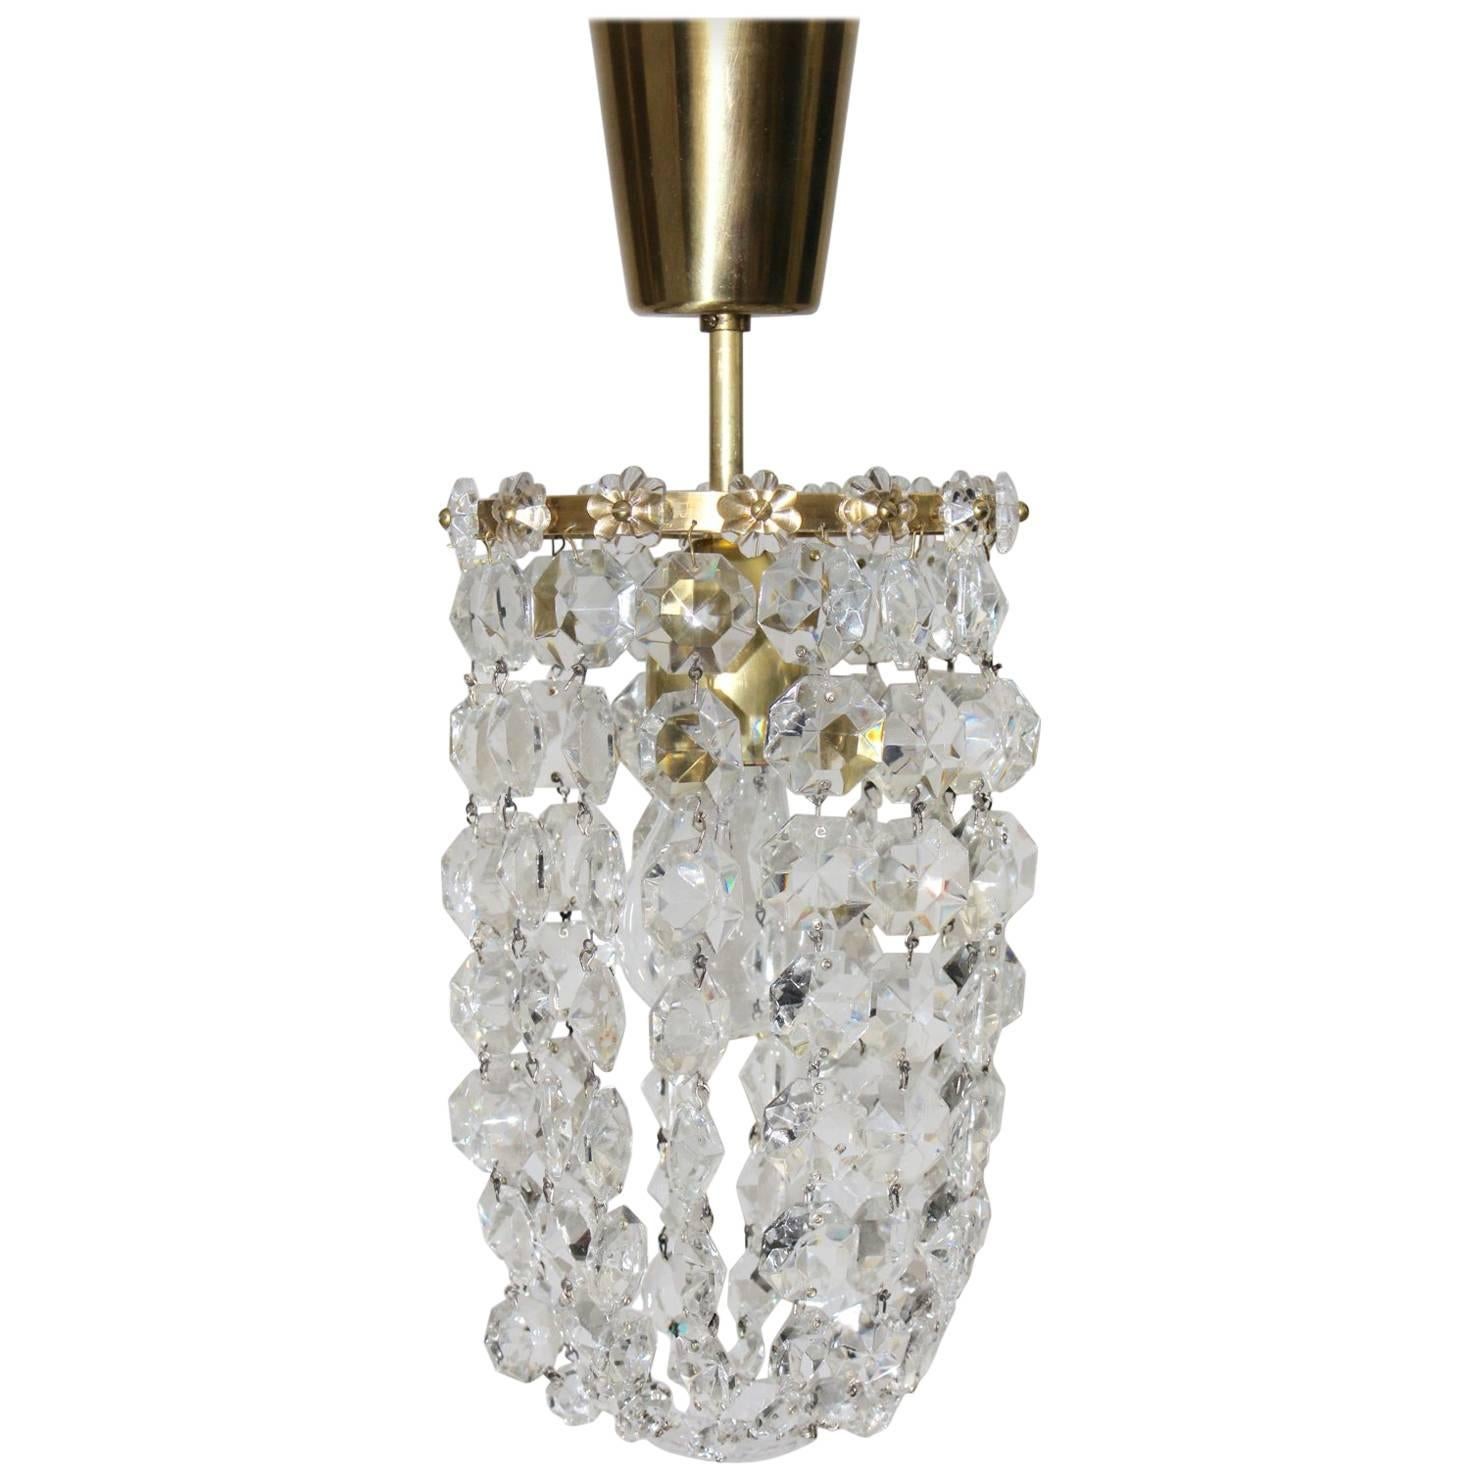 Mid Century Modern Crystal Glass Chandelier by Bakalowits & Soehne Vienna, 1950s For Sale